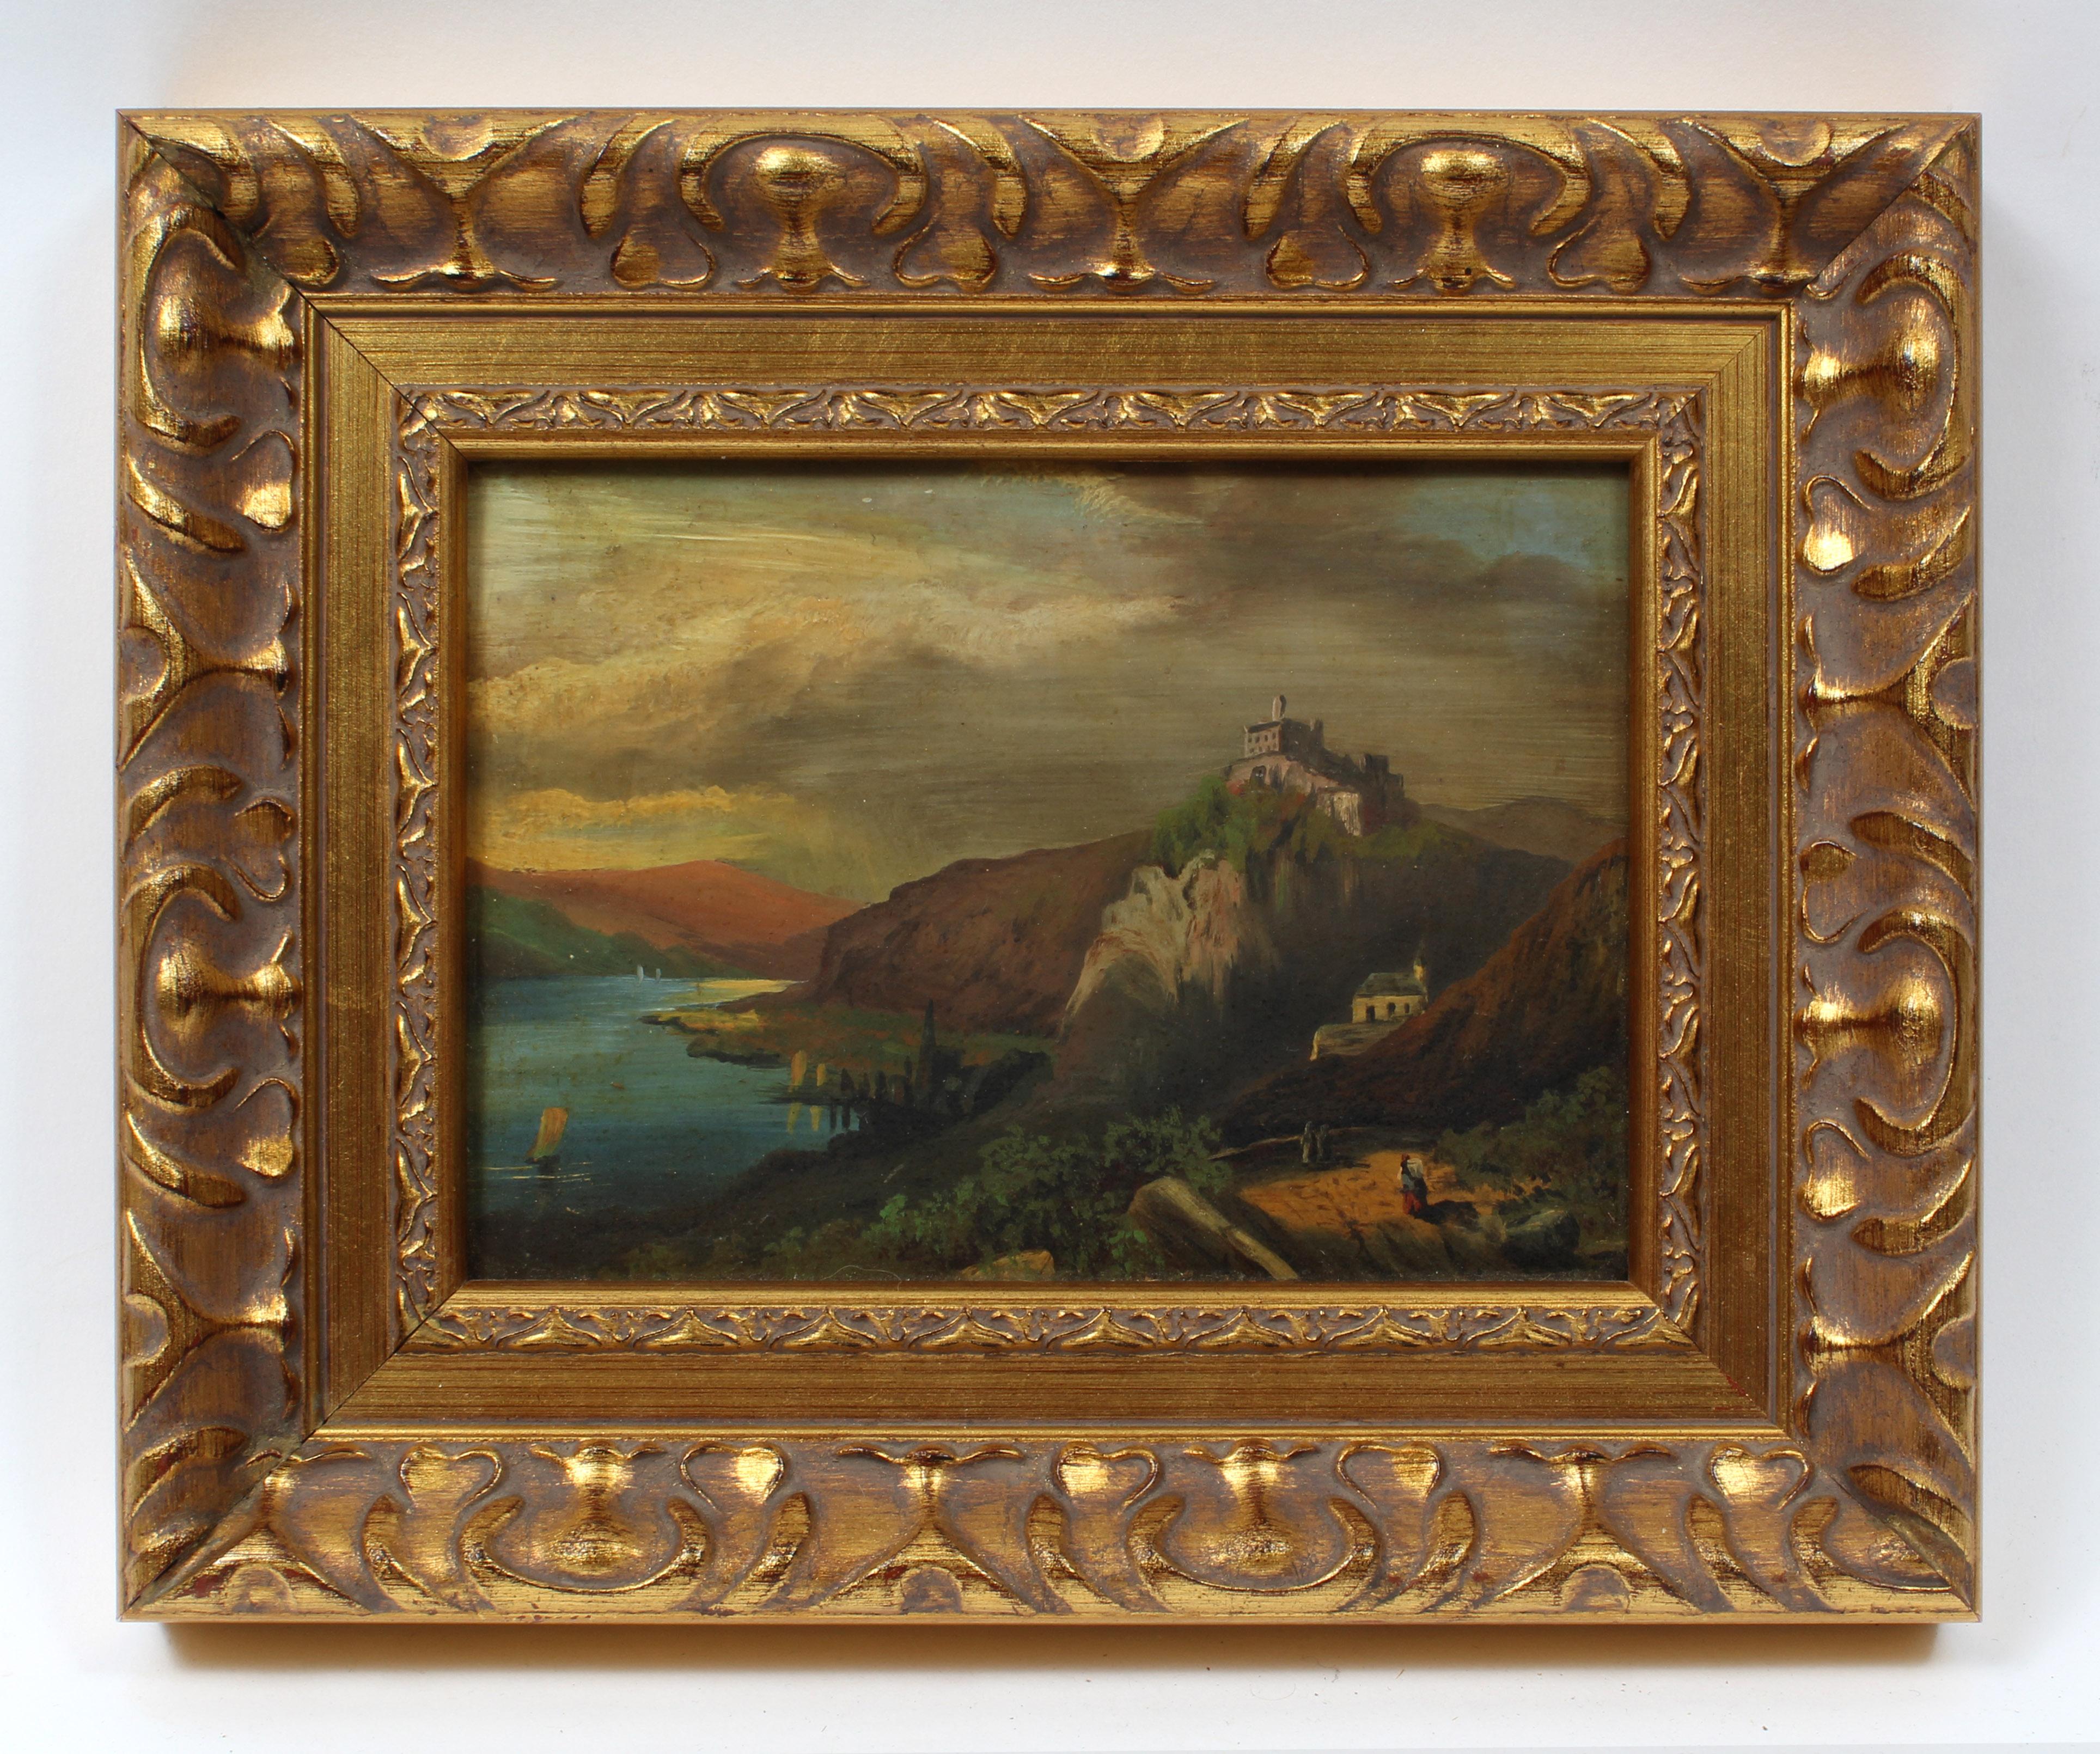 Unknown Landscape Painting - Antique American Hudson River School Painting Castle Figures Framed 19th Century